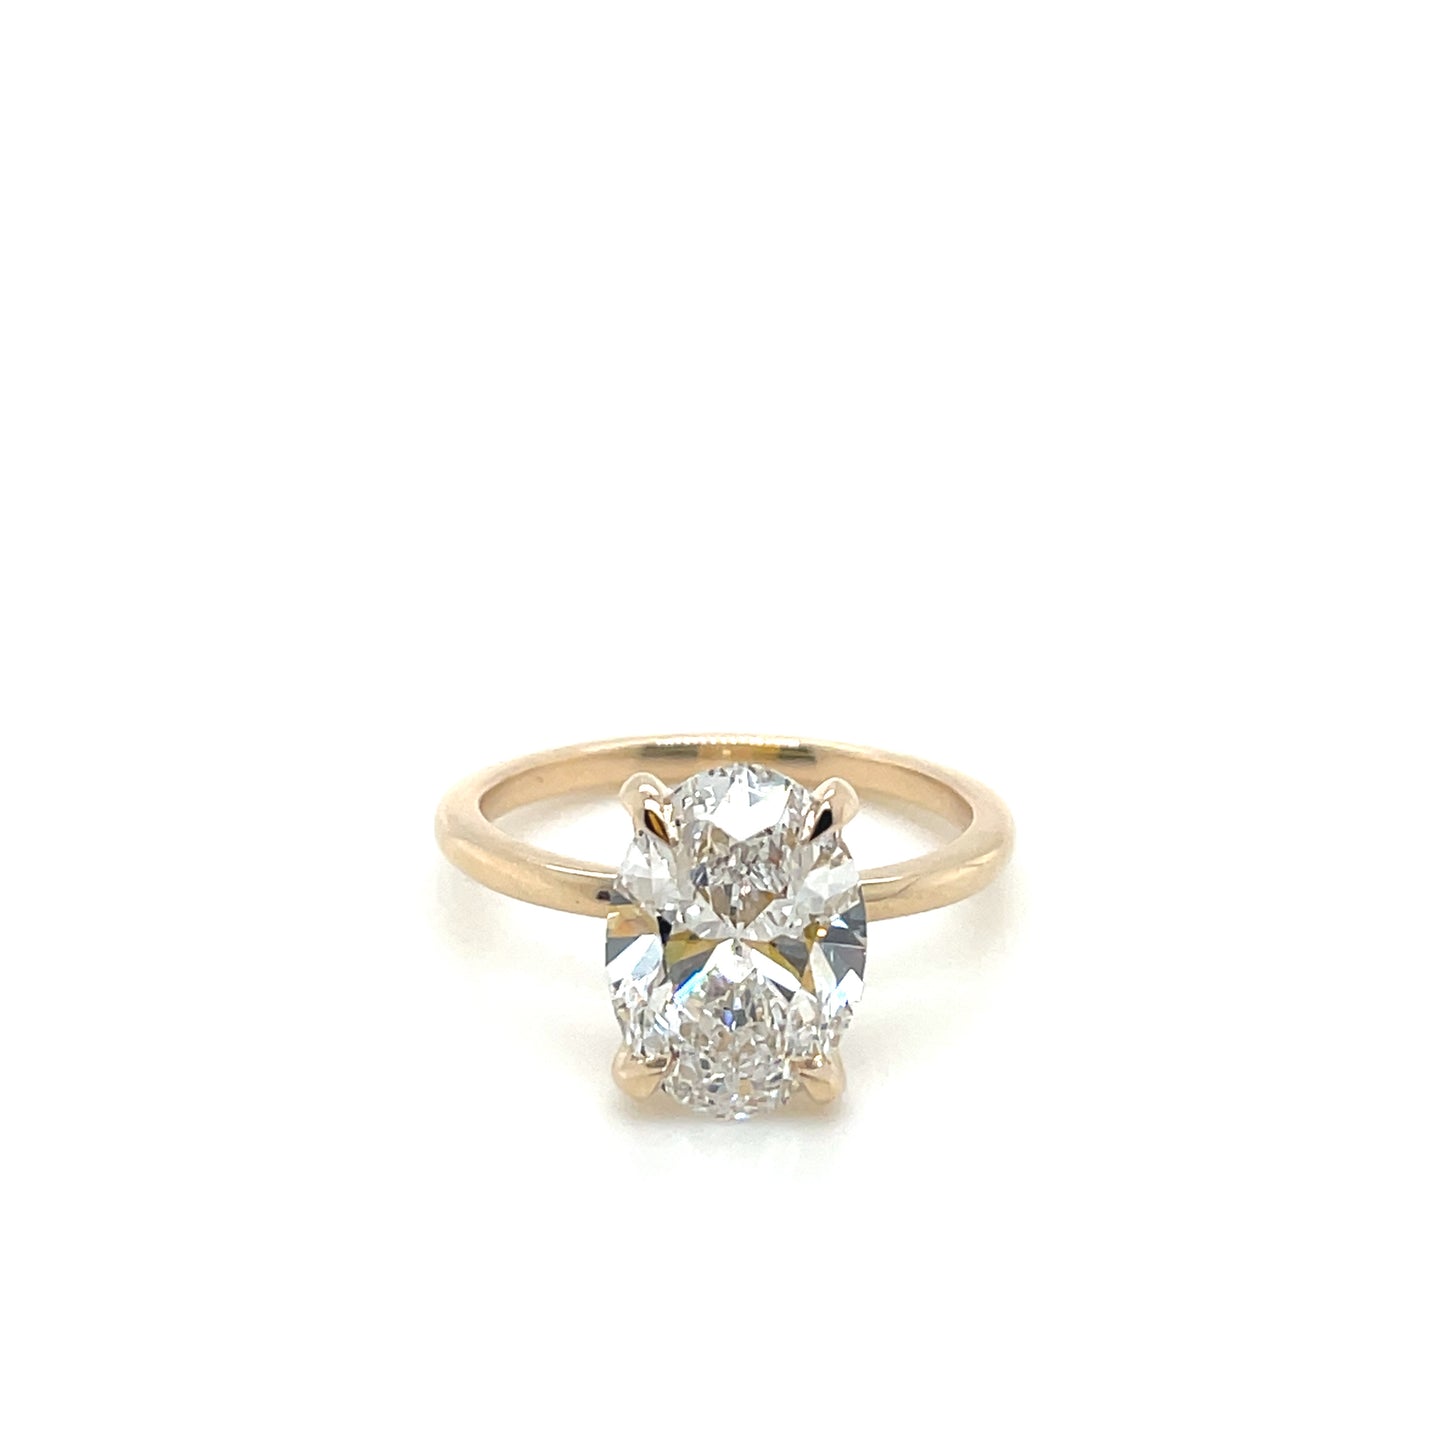 2.70 D VVS2 Oval Solitaire Ring in 18k Yellow Gold